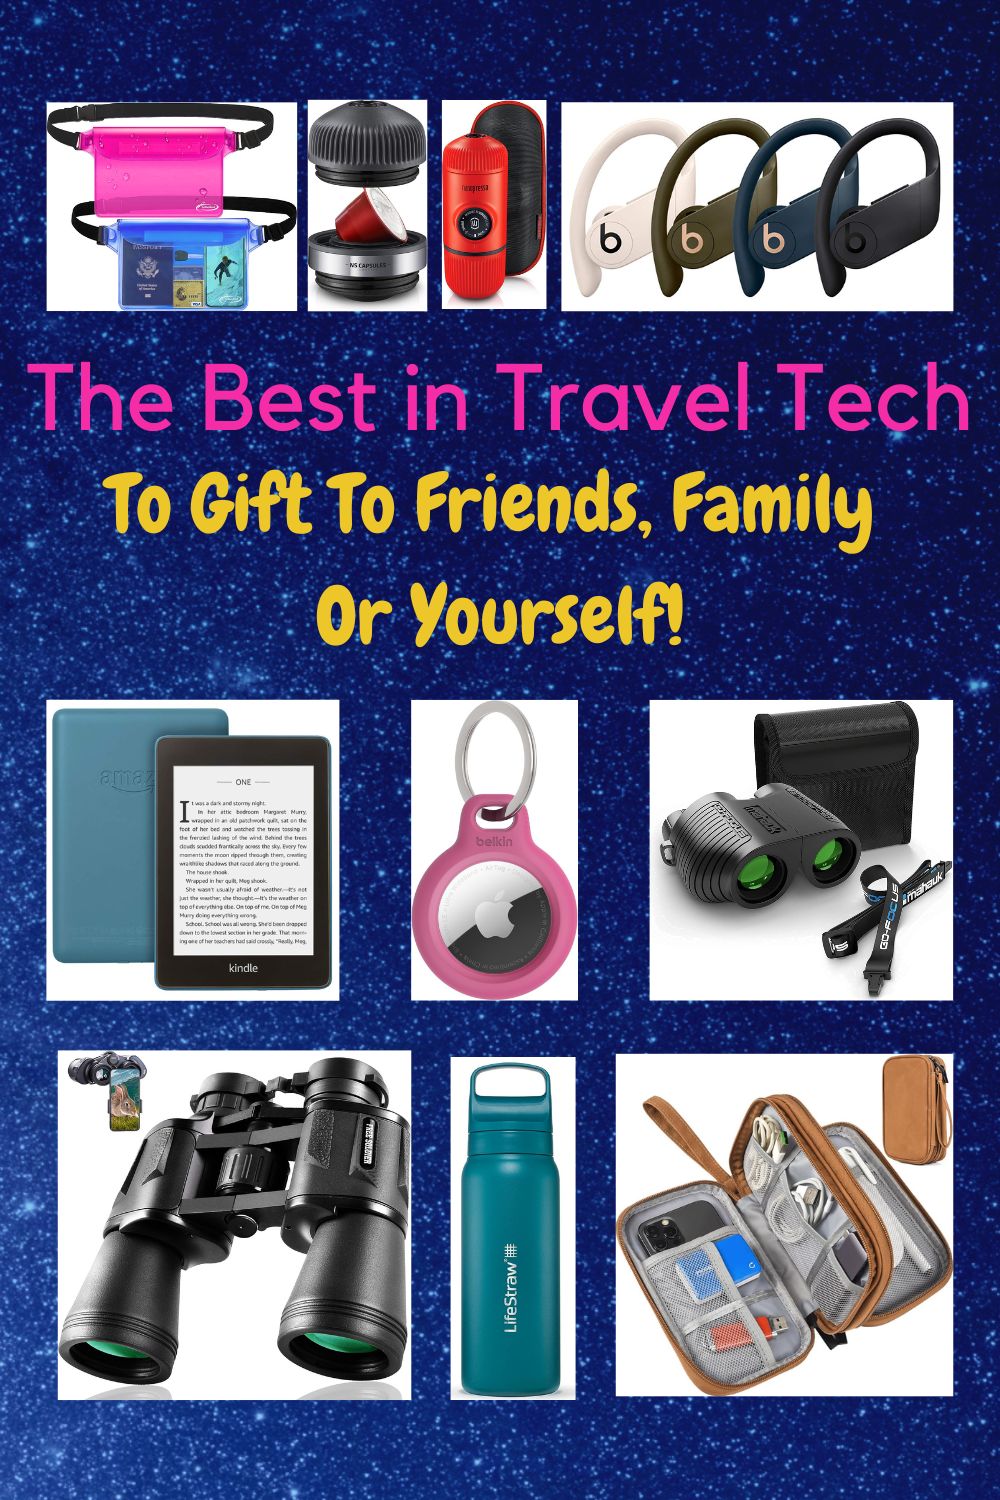 Top 20 Travel Gift Ideas | Best Gifts for Travellers & Backpackers